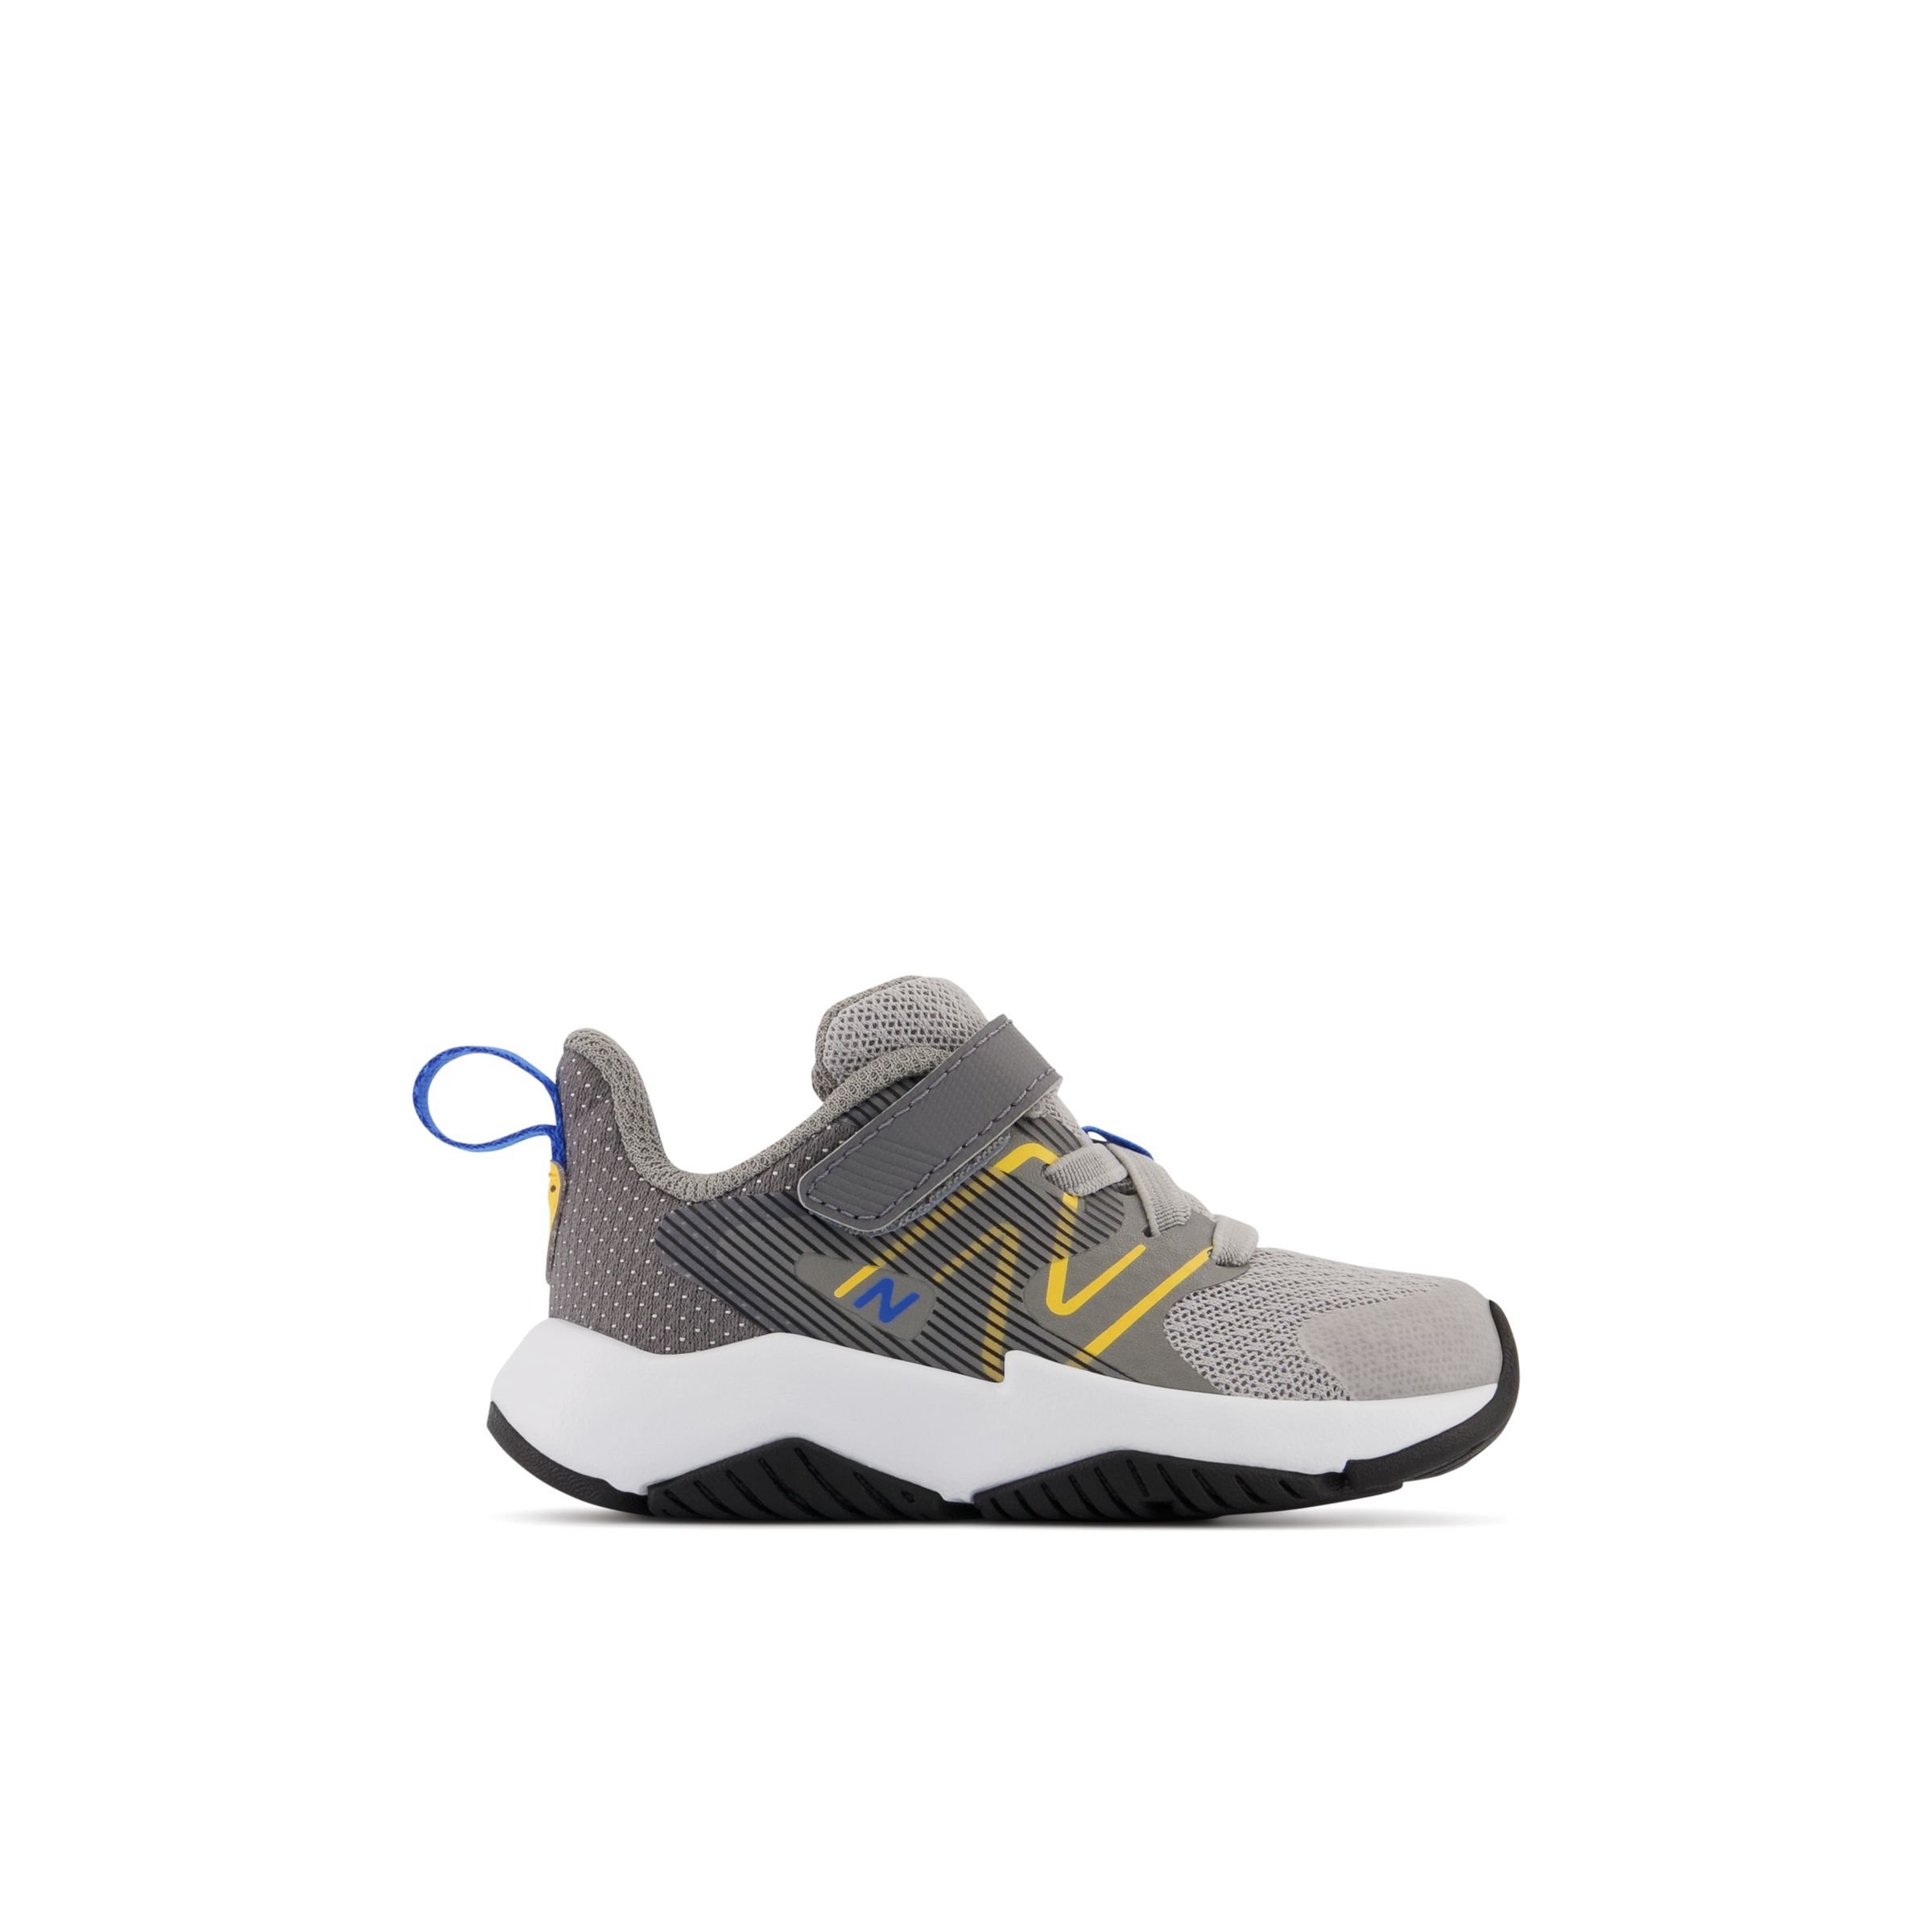 

New Balance Kids' Rave Run v2 Bungee Lace with Top Strap Grey/Yellow - Grey/Yellow